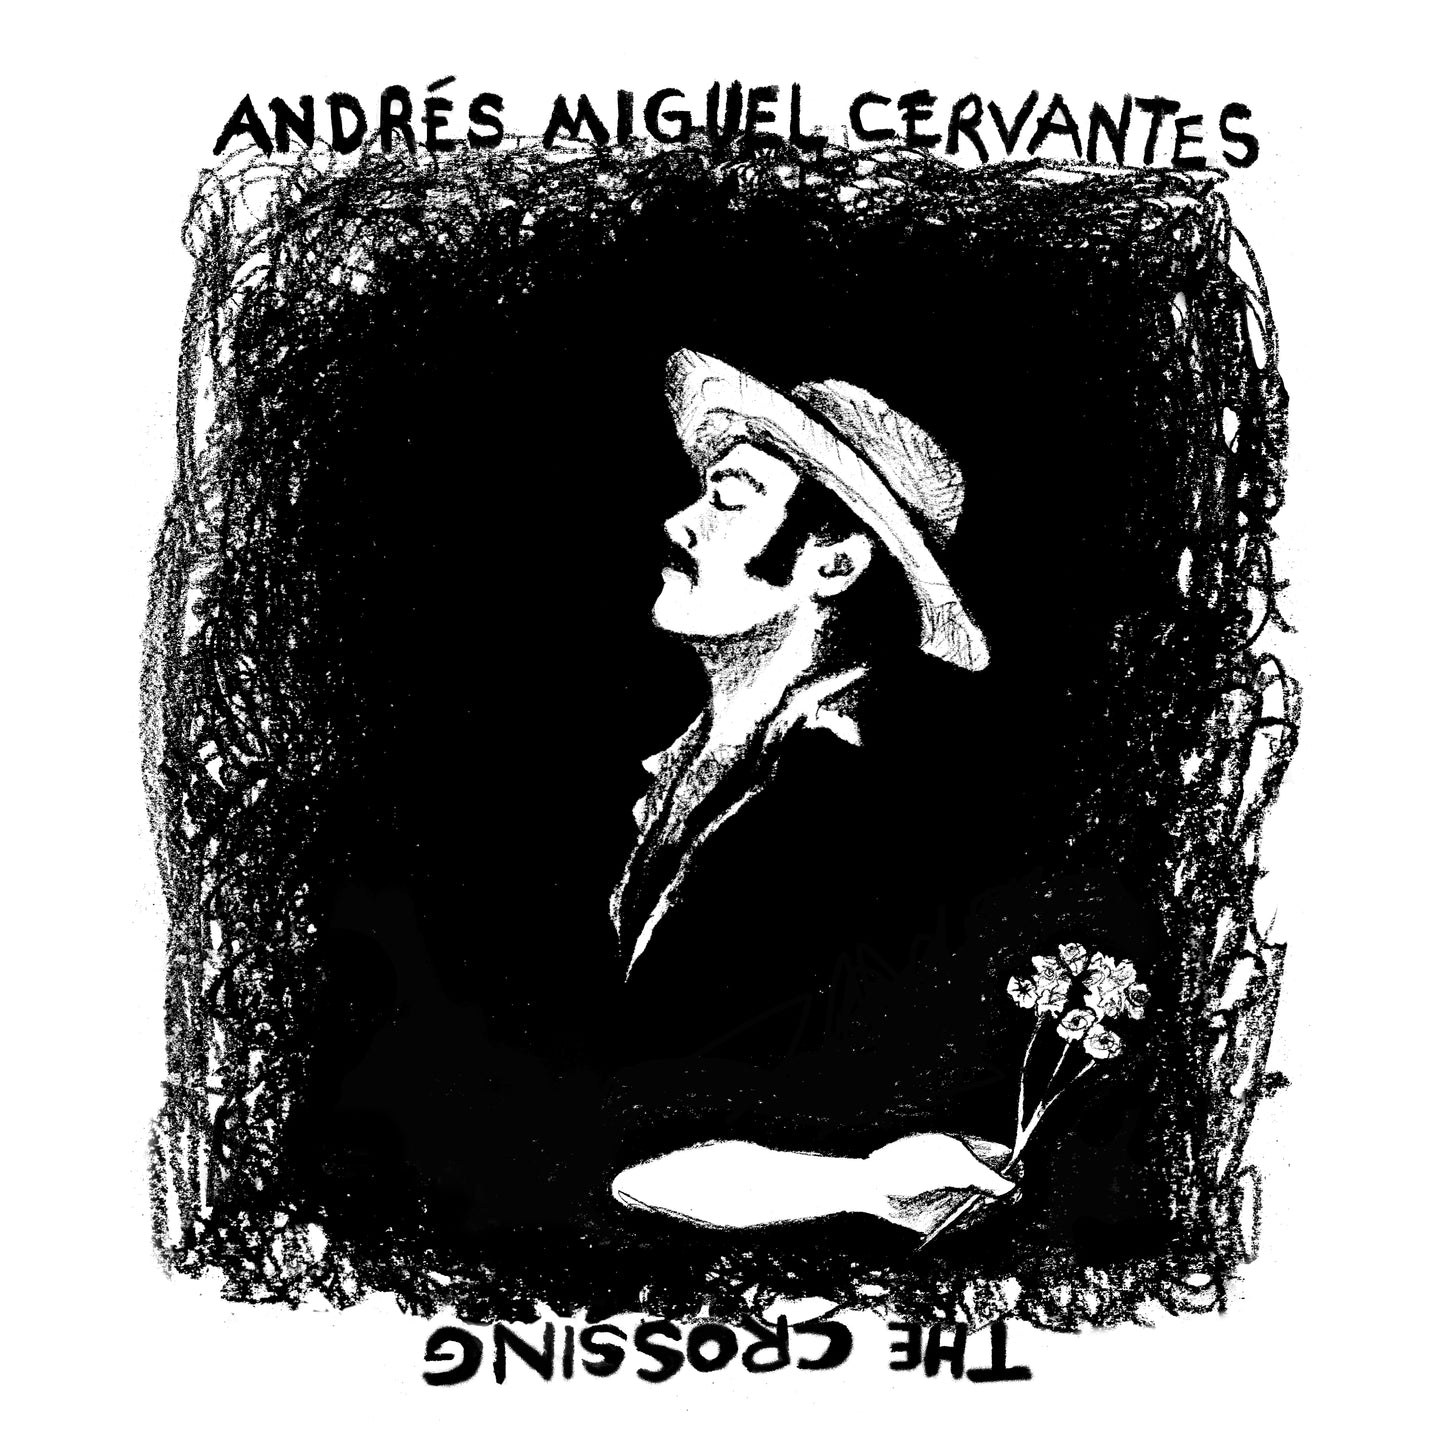 "The Crossing" by Andrés Miguel Cervantes - 12" Limited Edition LP